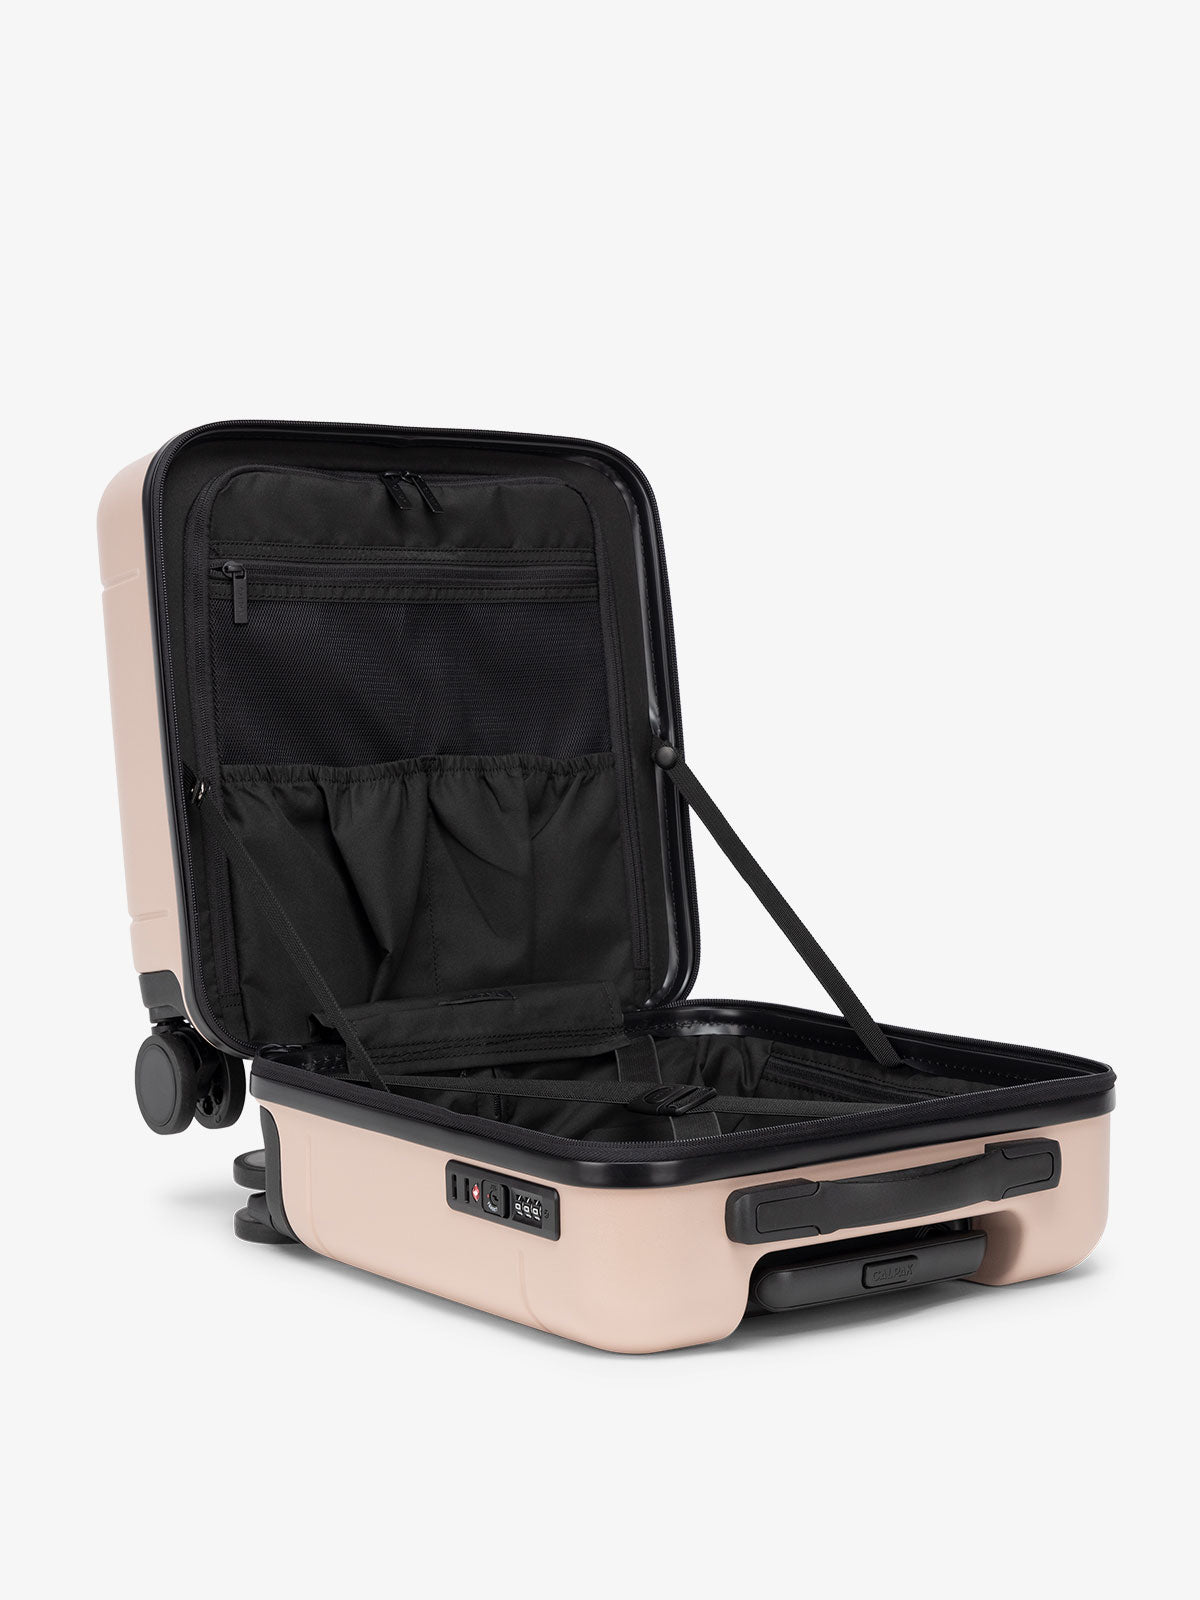 small carry on suitcase for travel with compression straps and multiple compartments